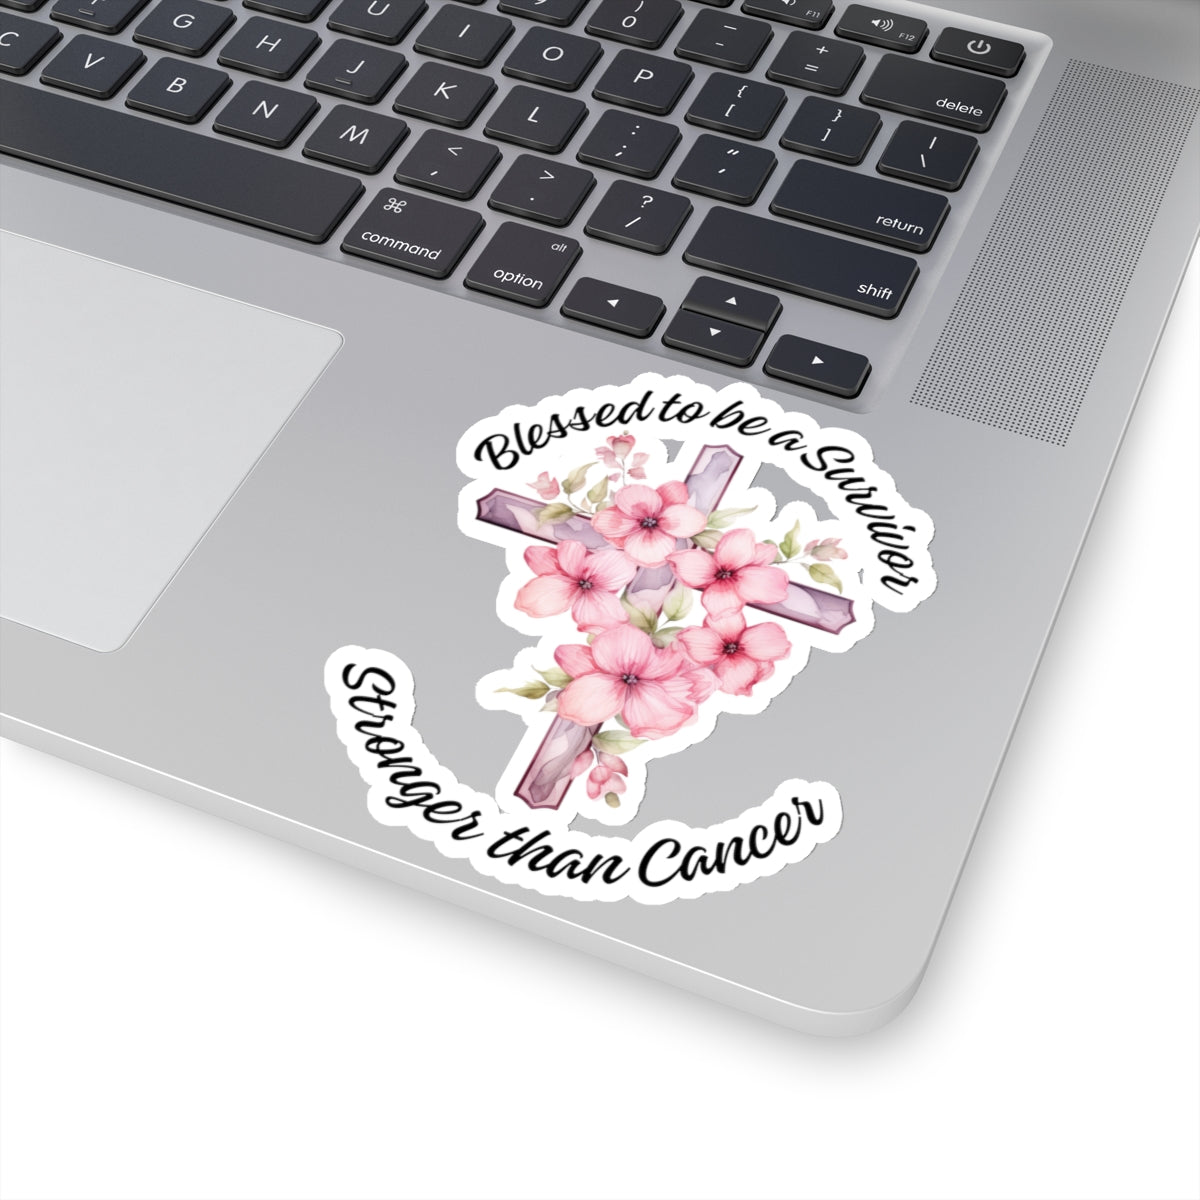 Blessed to Be A Survivor...Inspirational Quote Kiss-Cut Stickers-Paper products-mysticalcherry